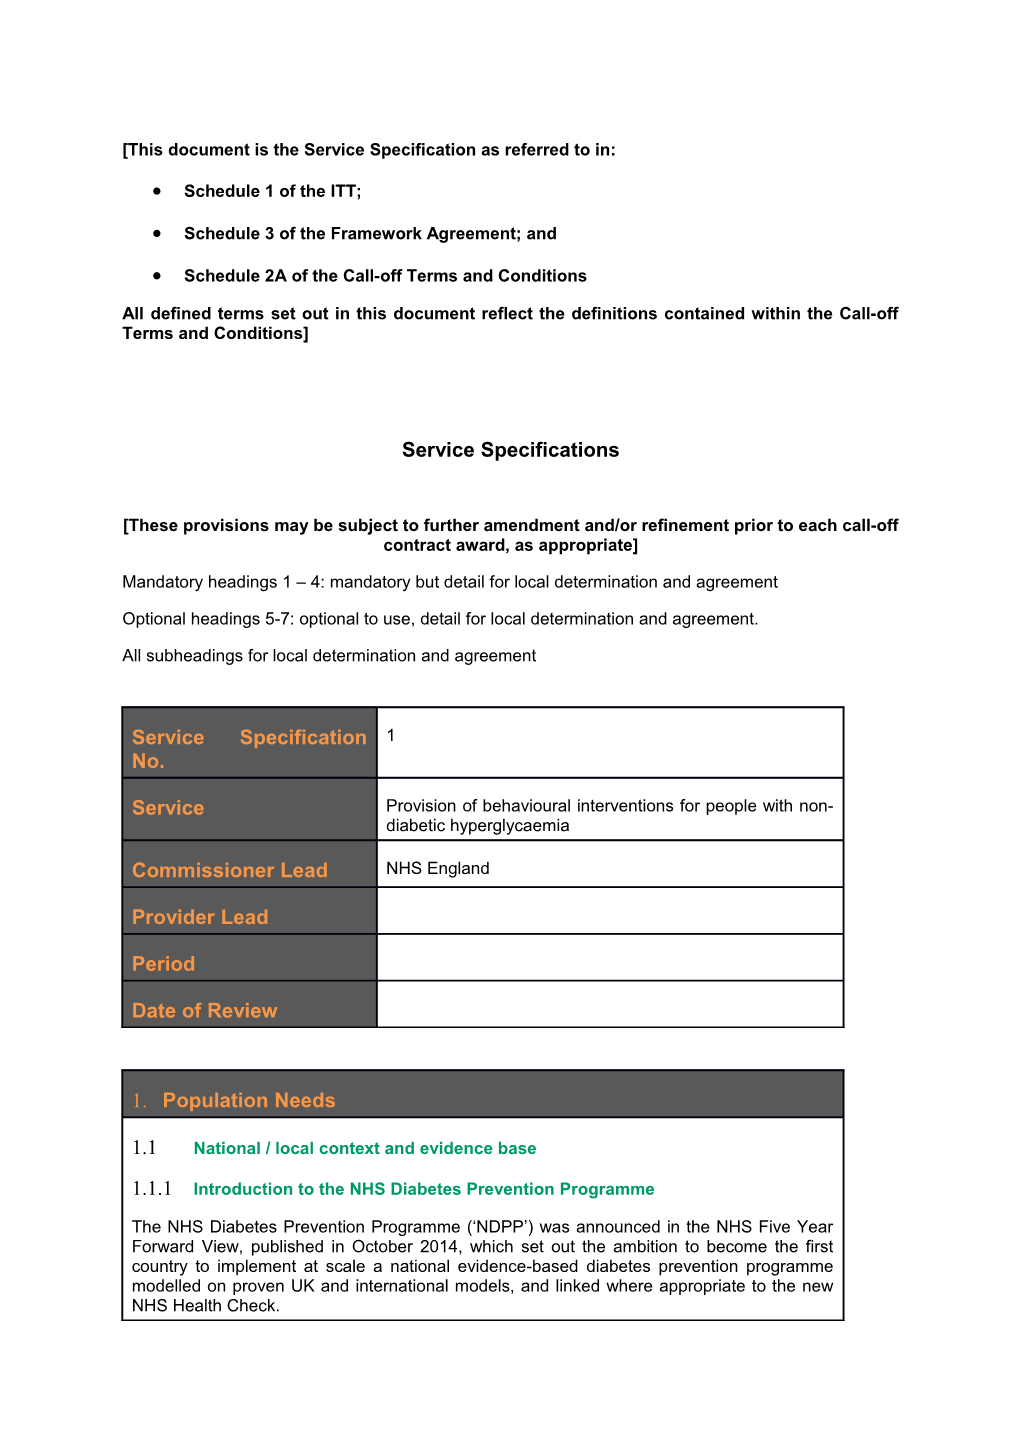 This Document Is the Service Specification As Referred to In